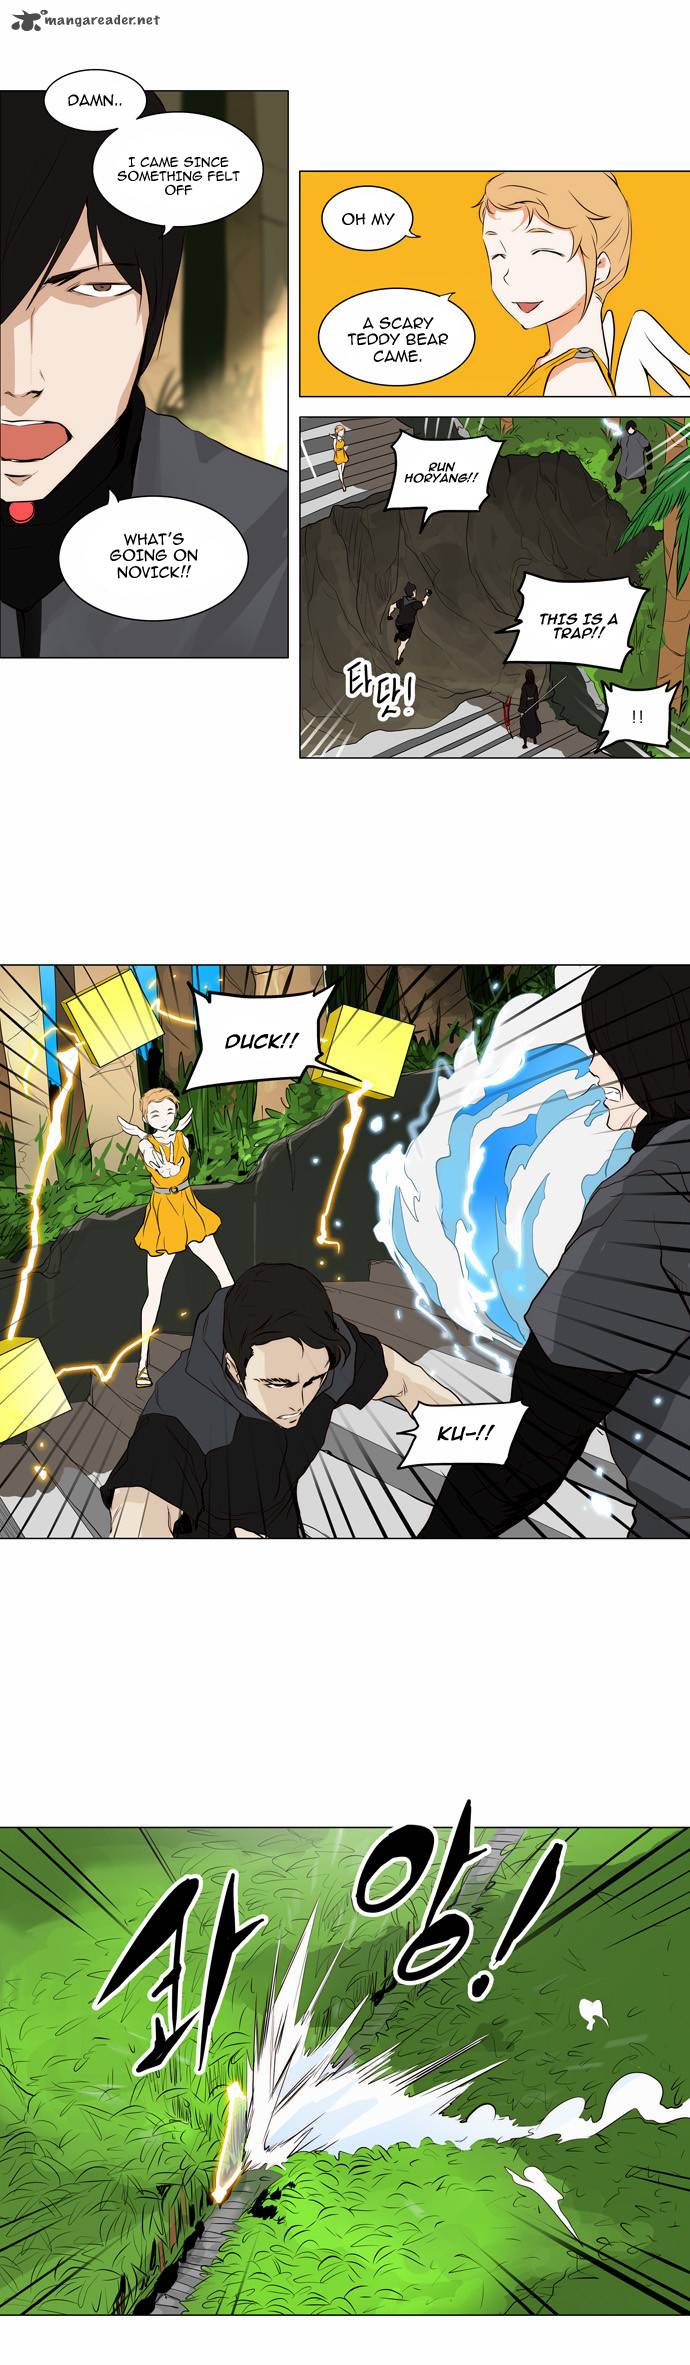 Tower Of God 164 17